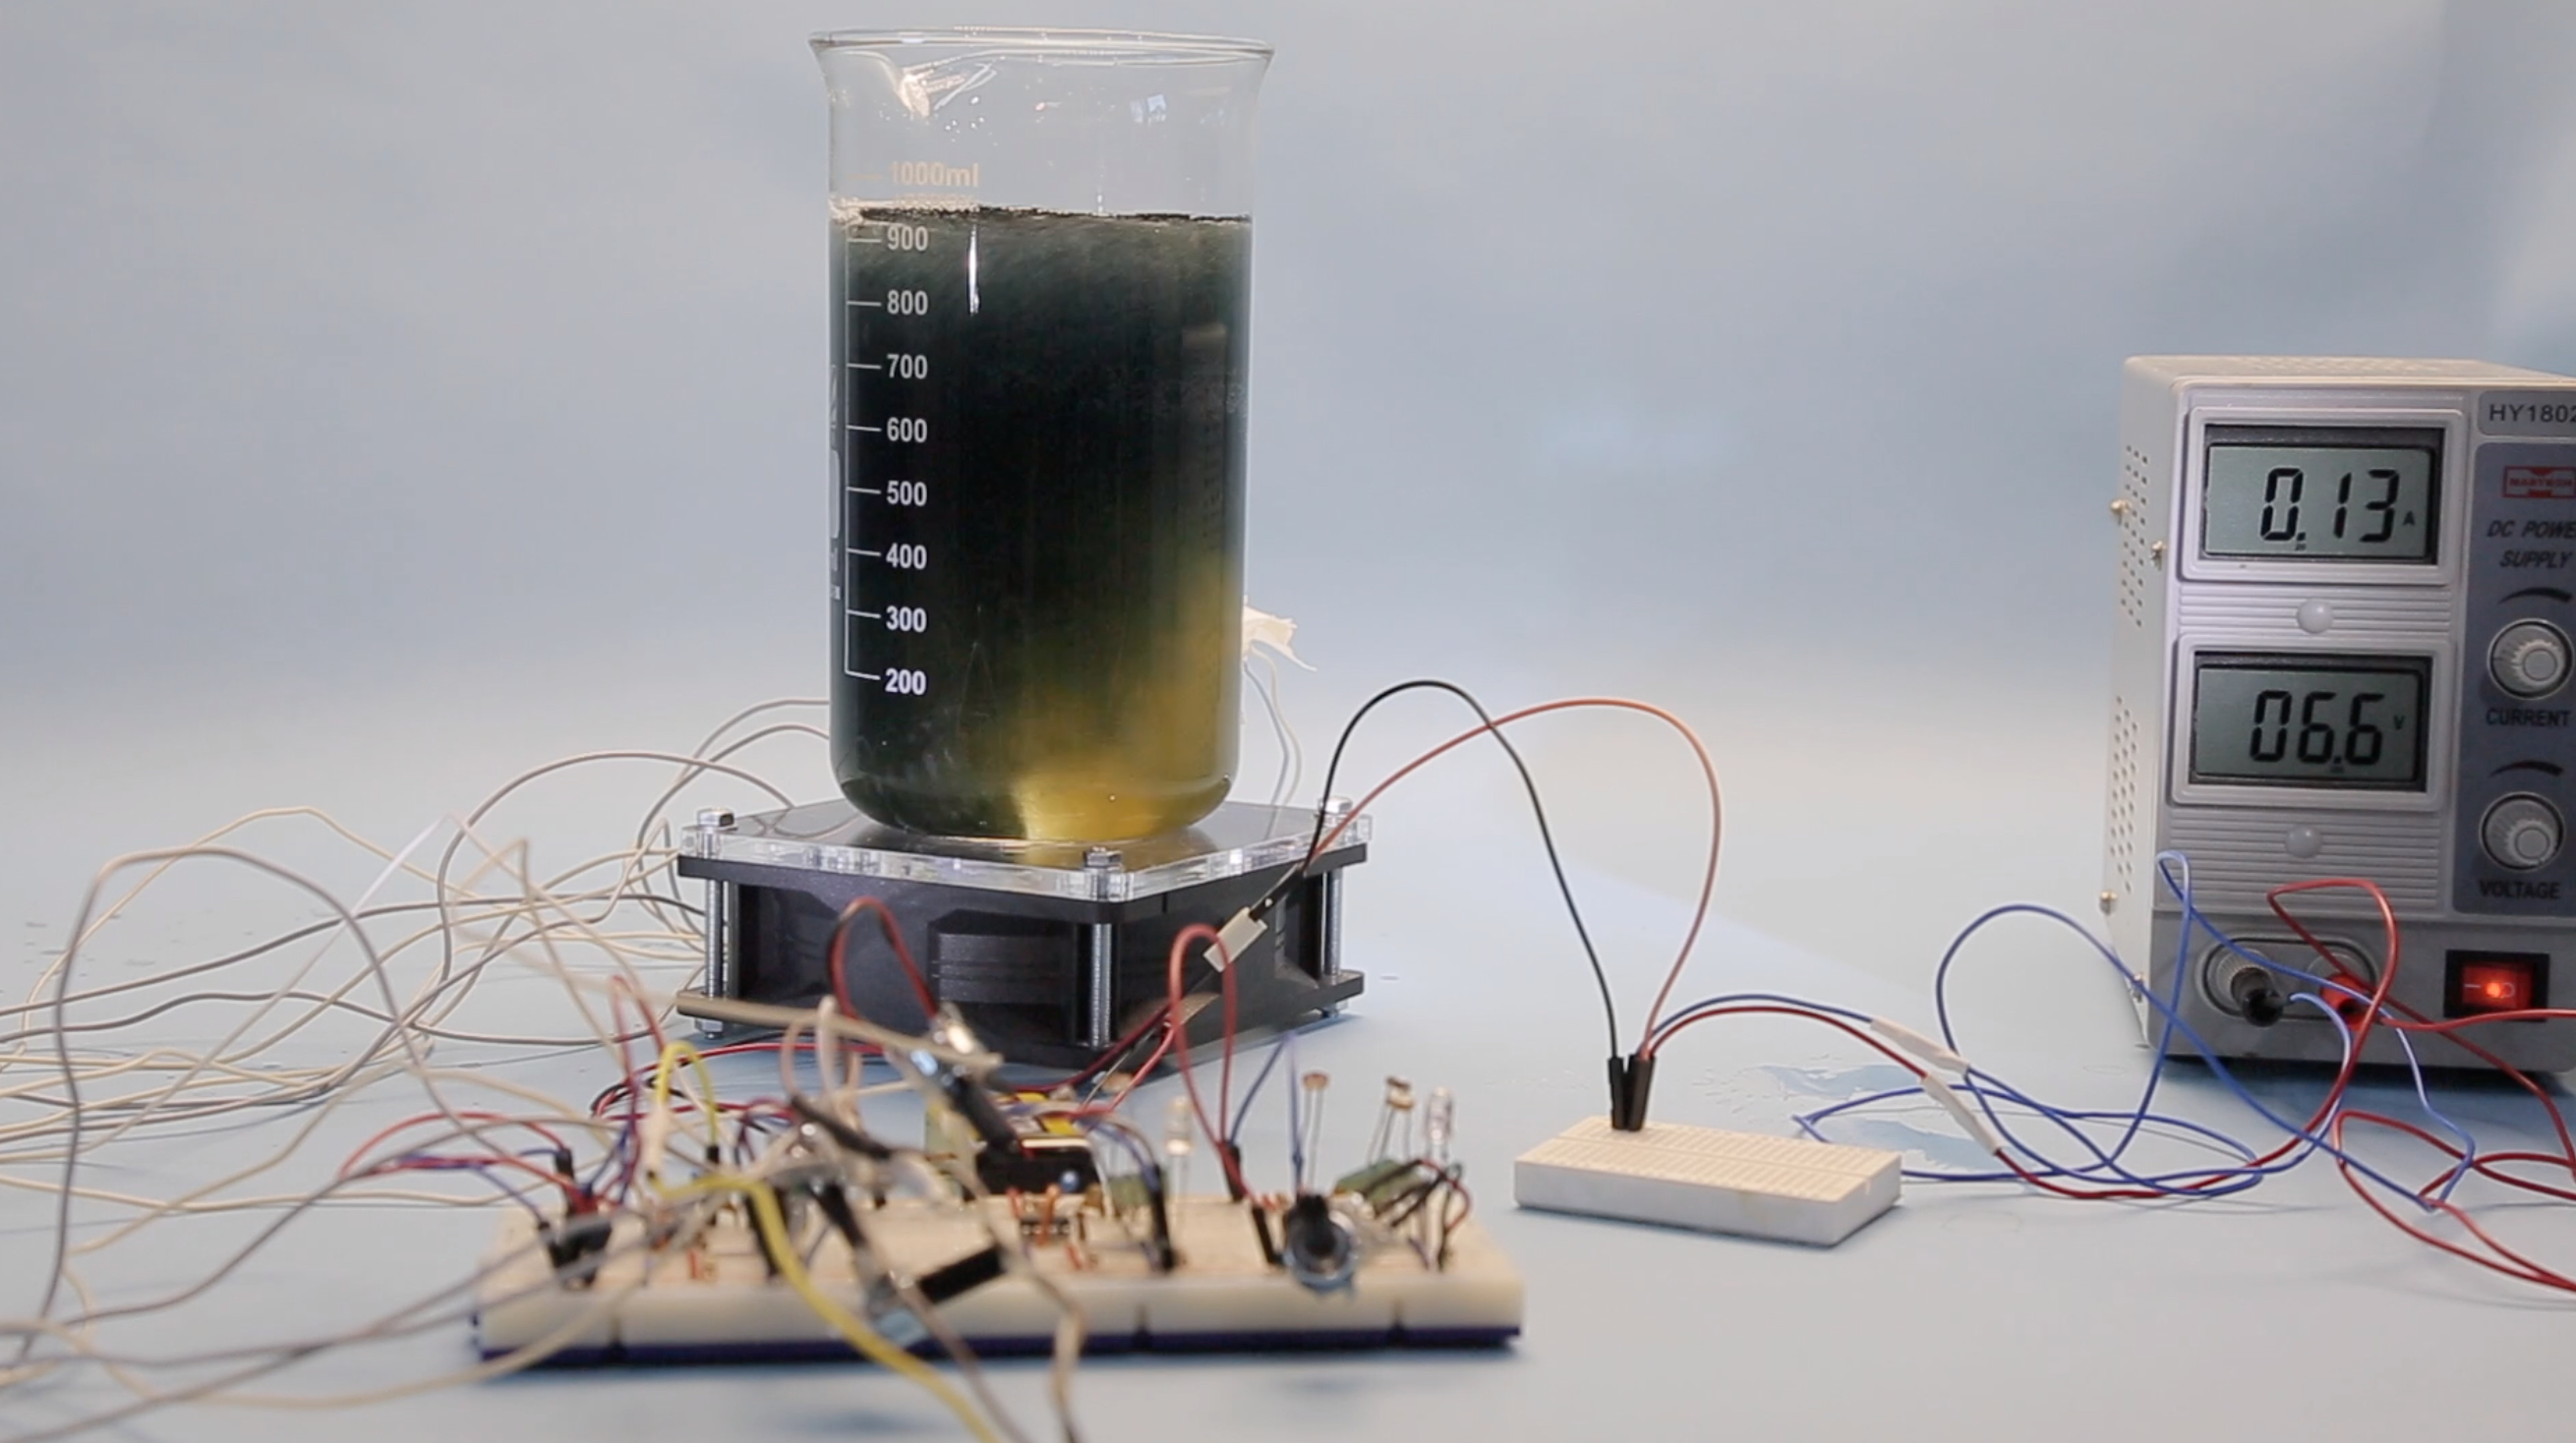 Scheduled Randomness, 2020. In collaboration Nikolay Golikov. Sound art project with oscillating iodine clock reaction